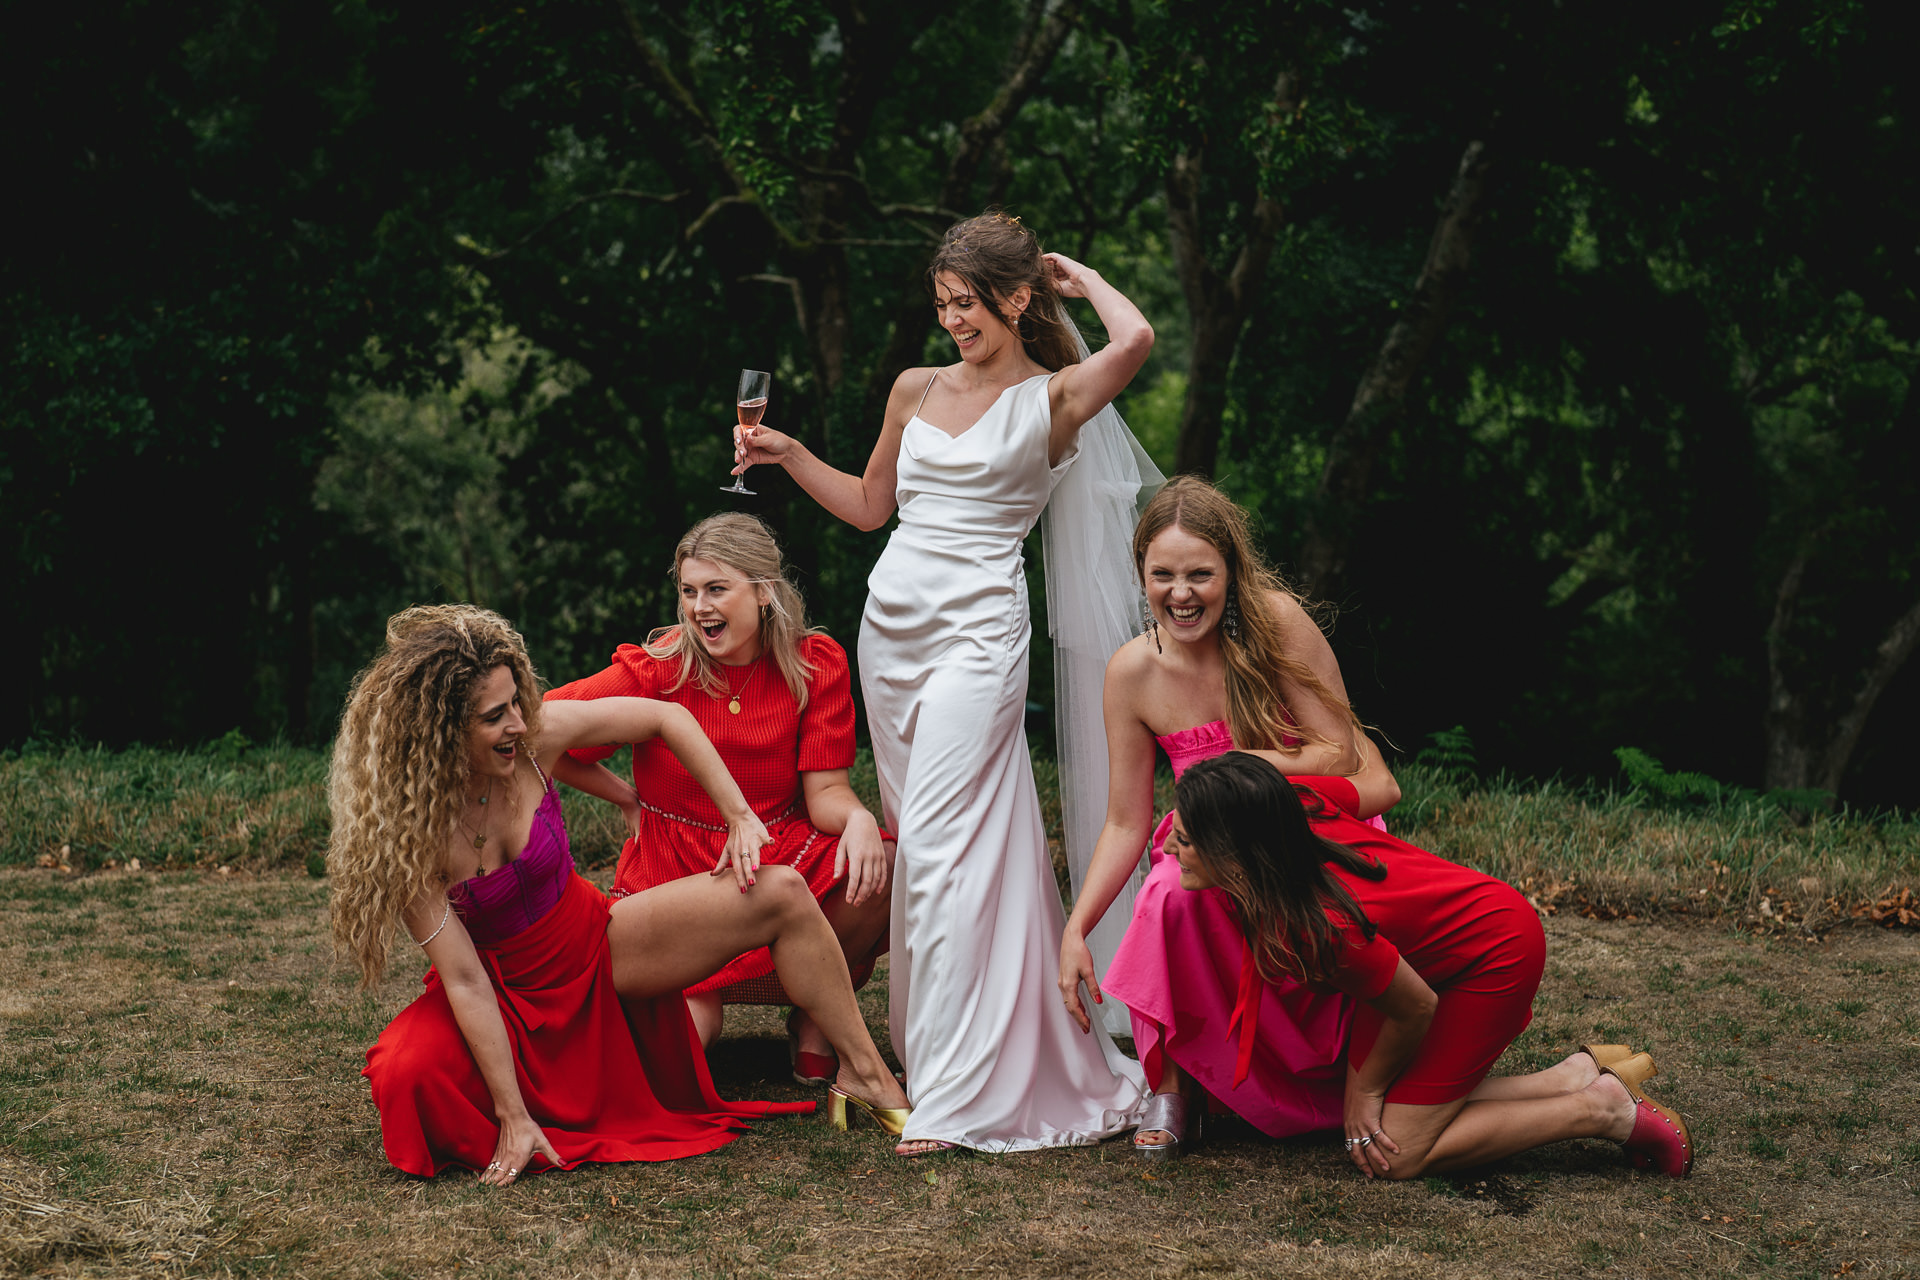 A fun group photo of a stylish bride and bridesmaids. Bride is wearing Vivienne Westwood and bridesmaids in hot pink and bright red dresses